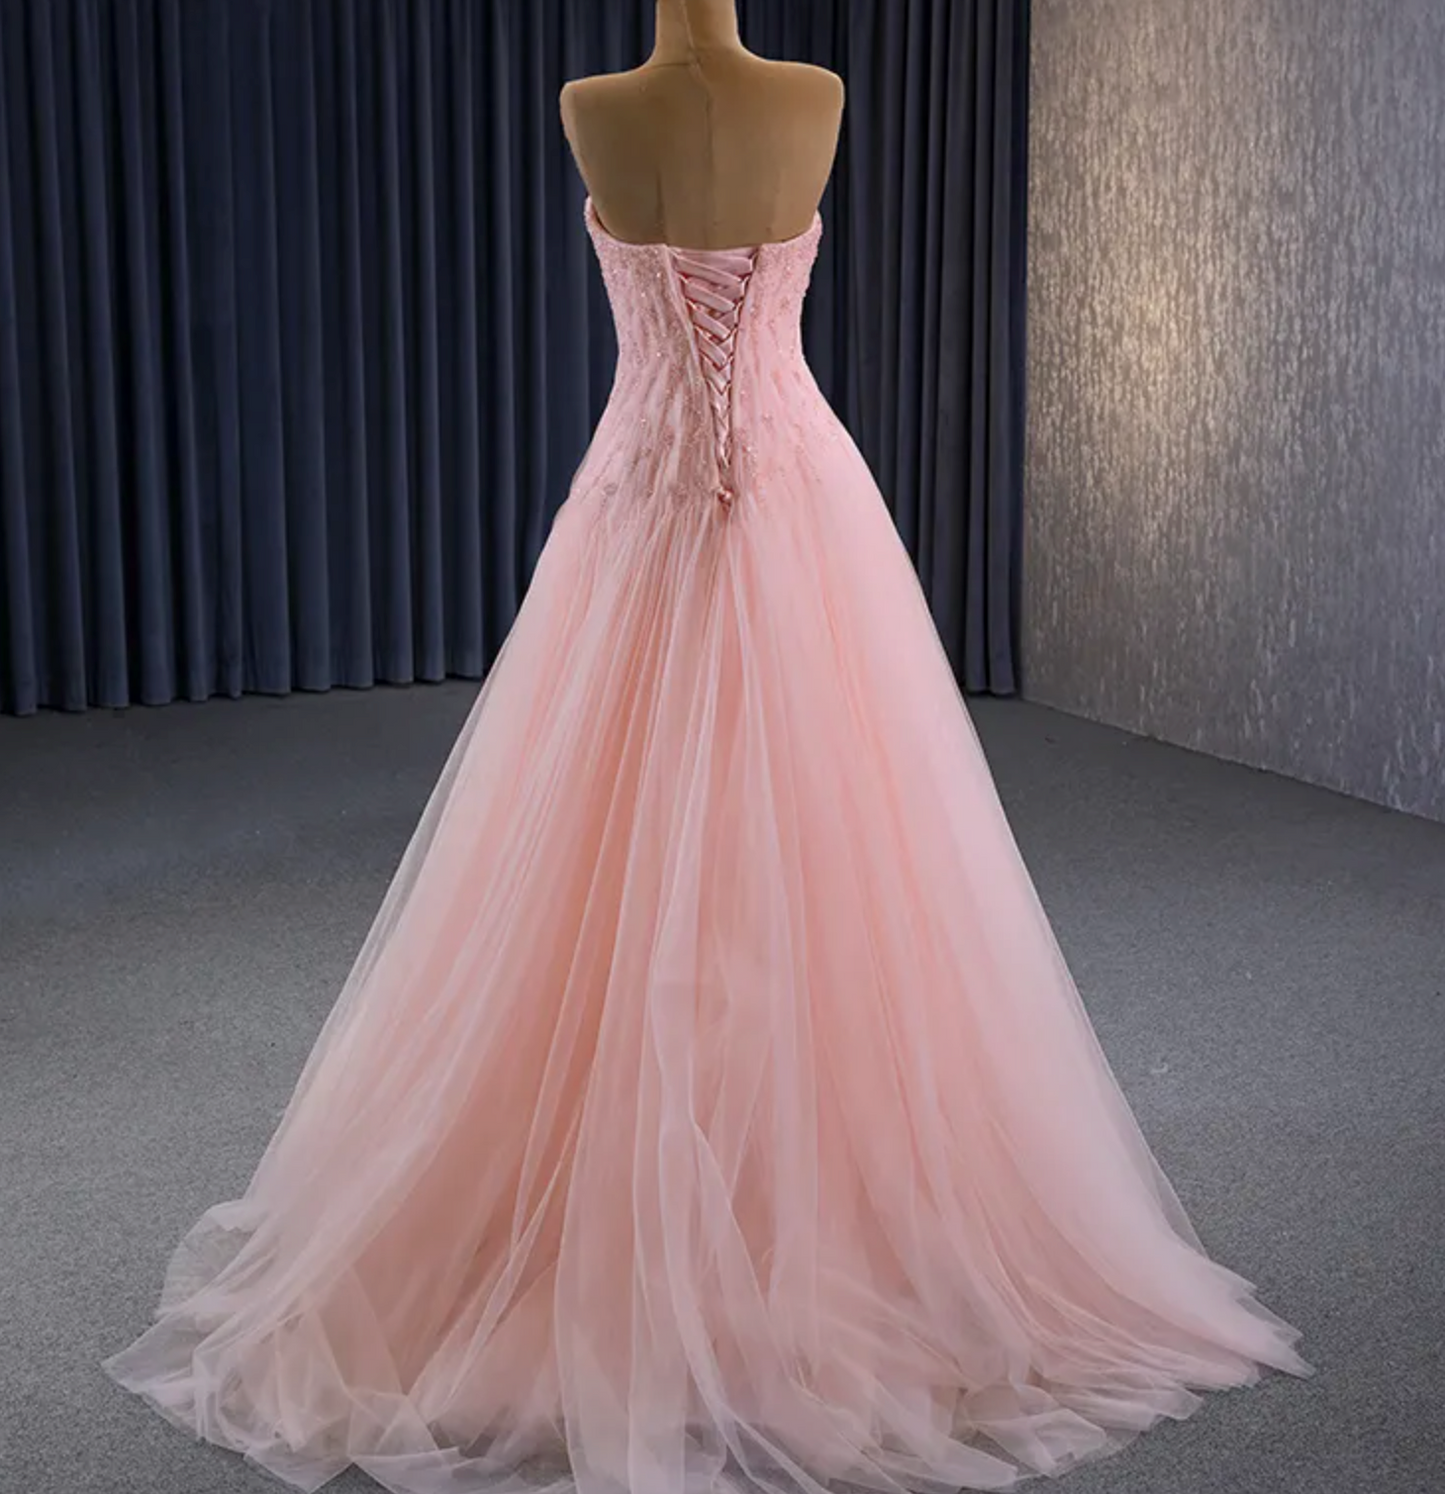 Beaded Sleeveless Pink Party Gown